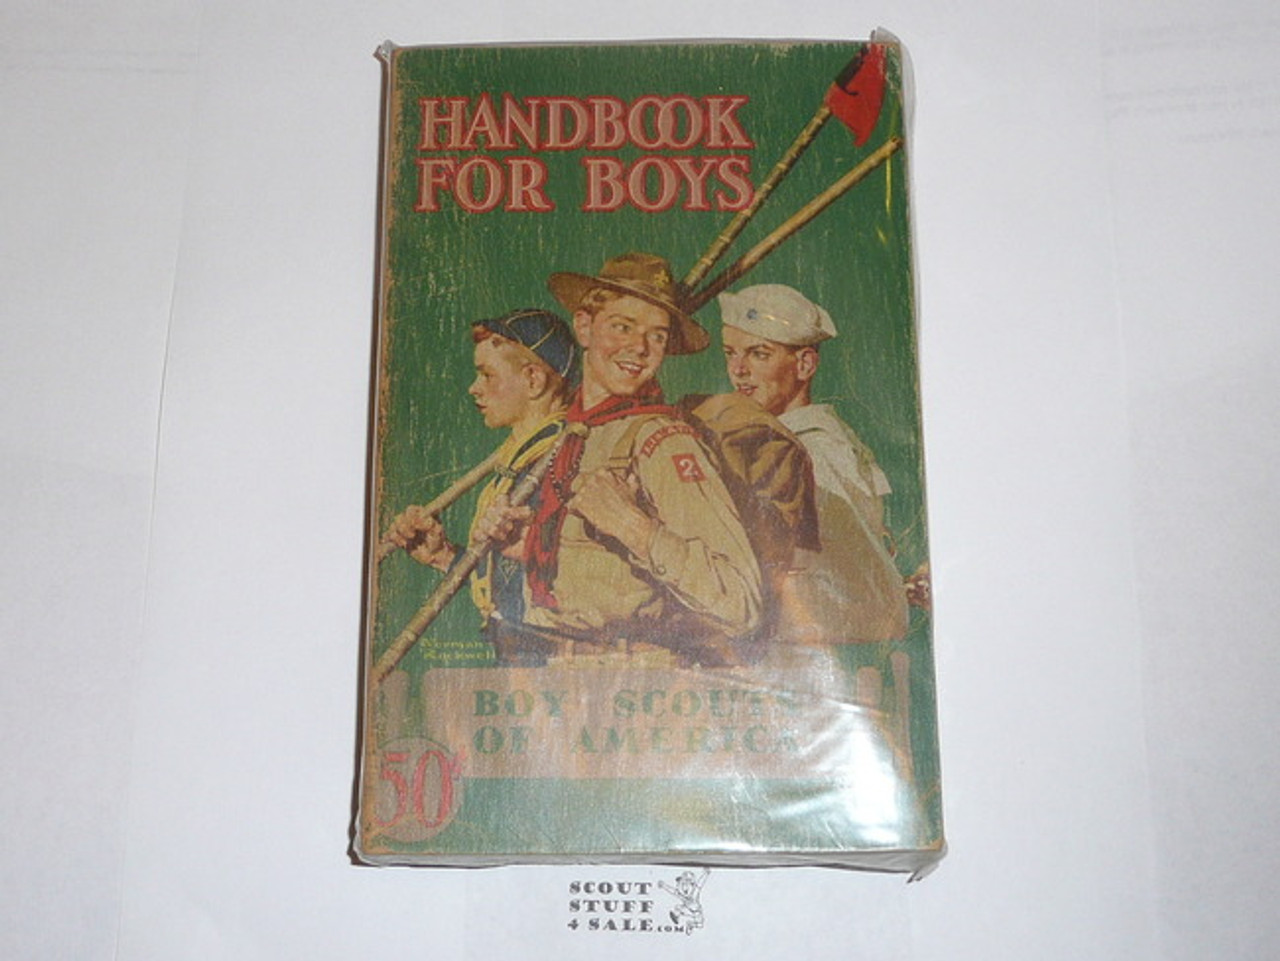 1940 Boy Scout Handbook, Fourth Edition, Thirty-third Printing, Norman Rockwell Cover, Near MINT condition, Distributed by American News Co.